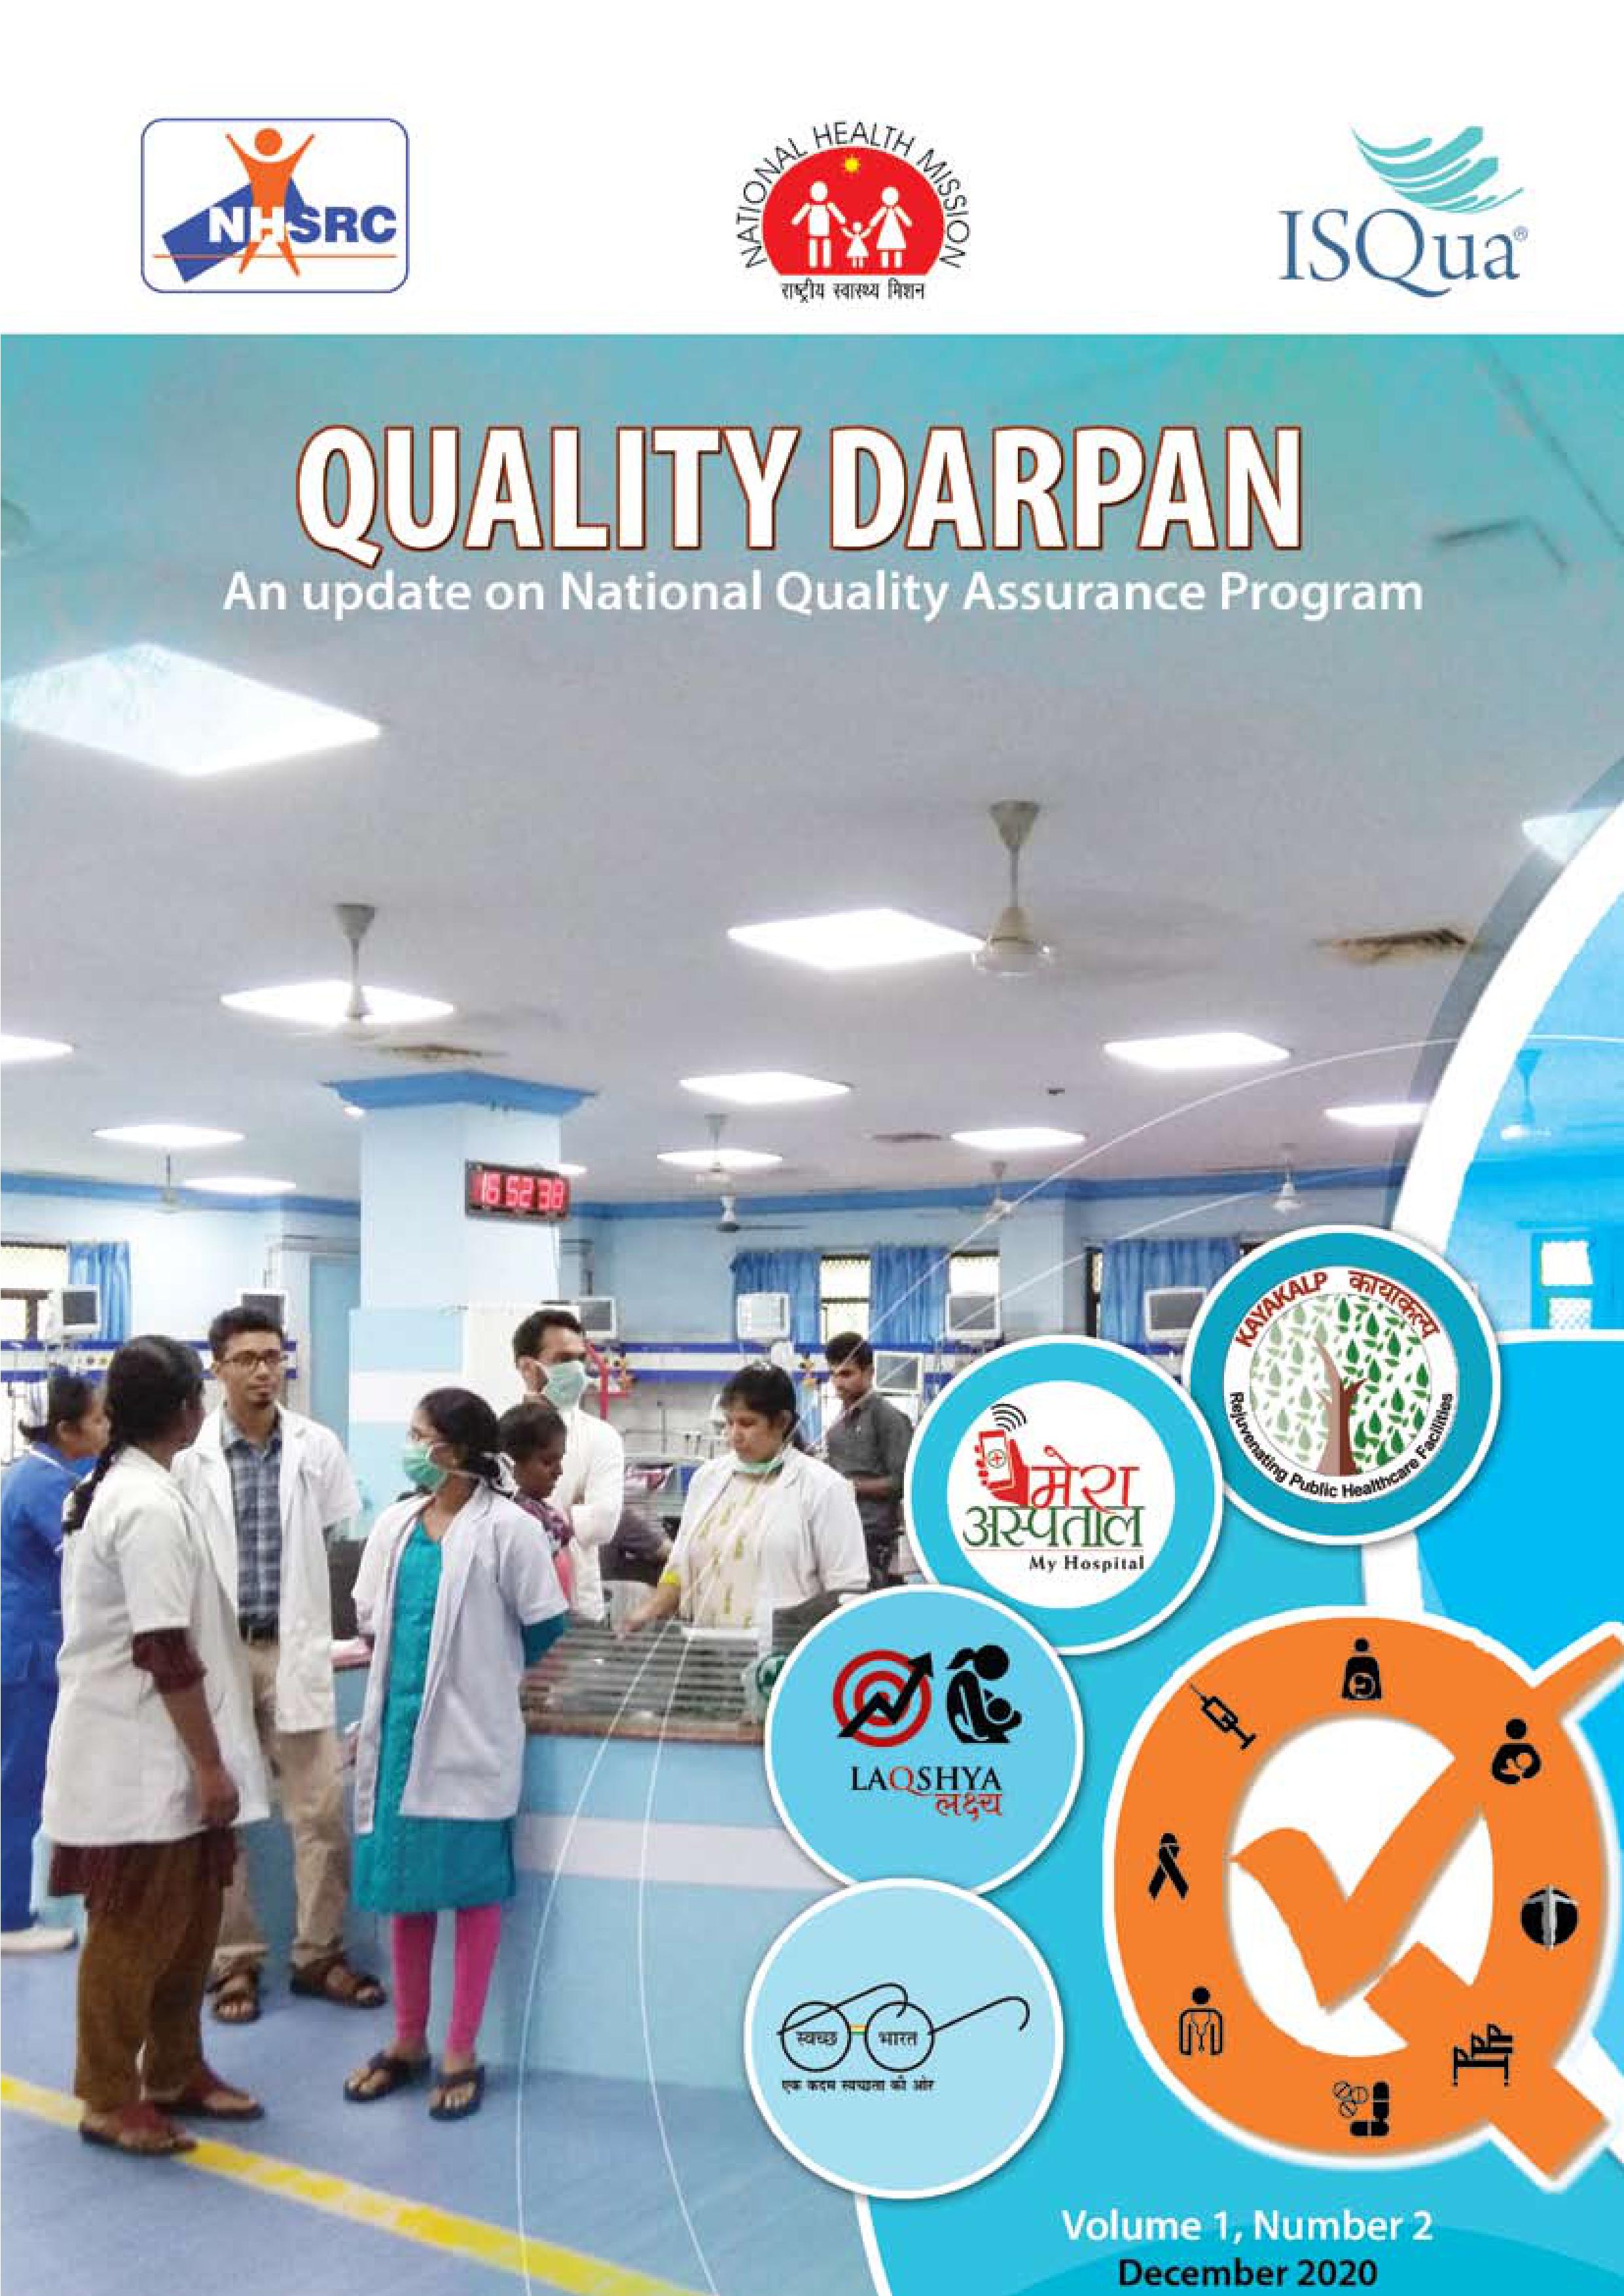 Quality Darpan - An update on National Quality Assurance Program